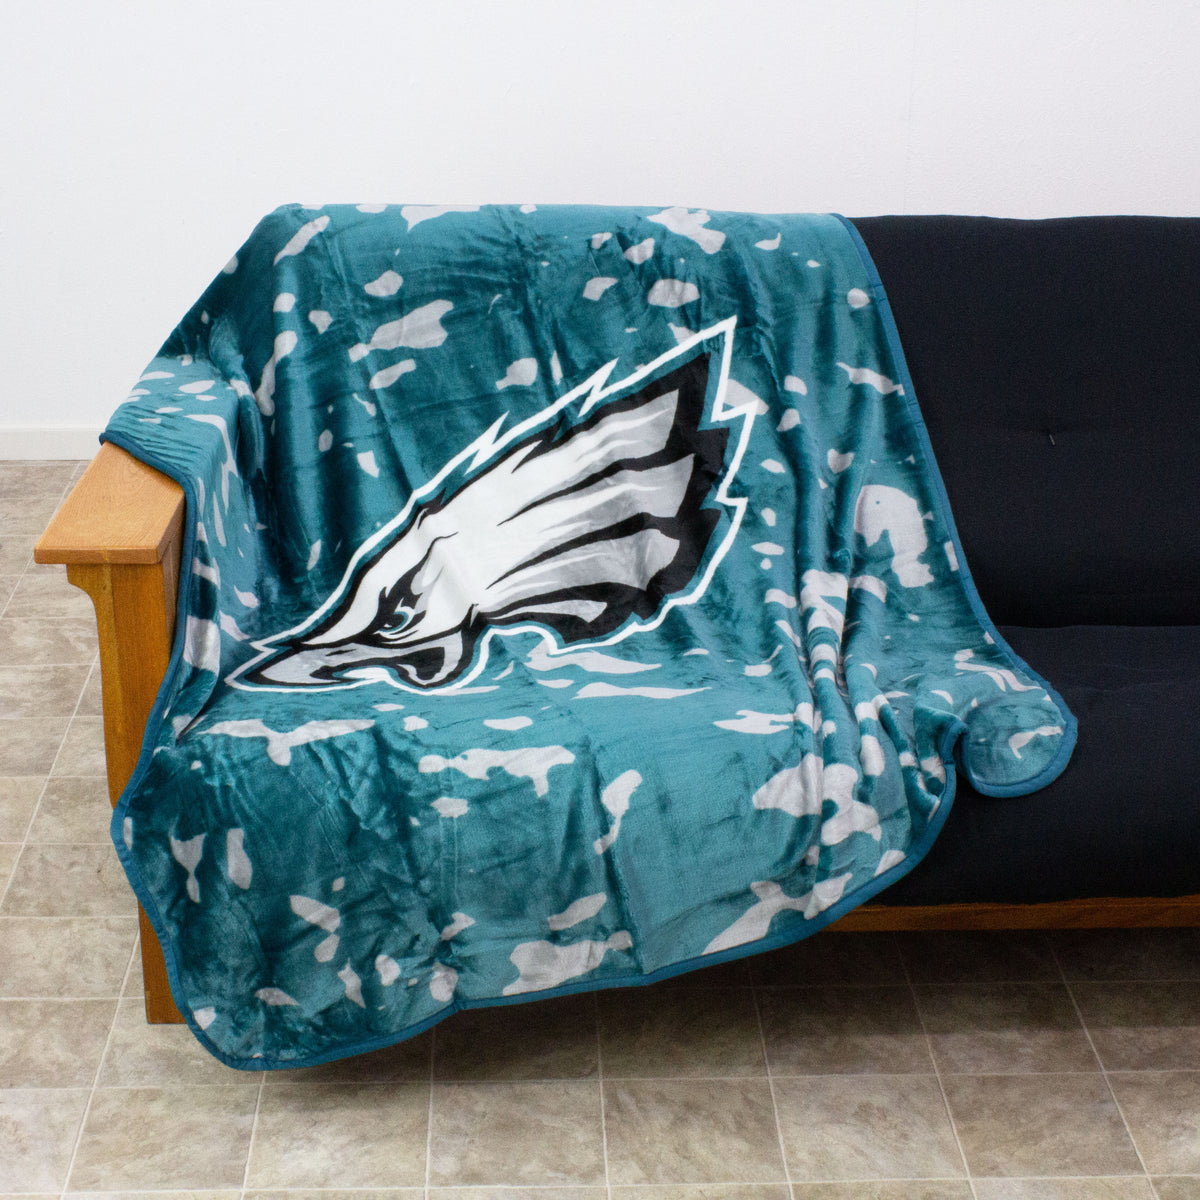 Louisville Cardinals Throw Blankets for Sale